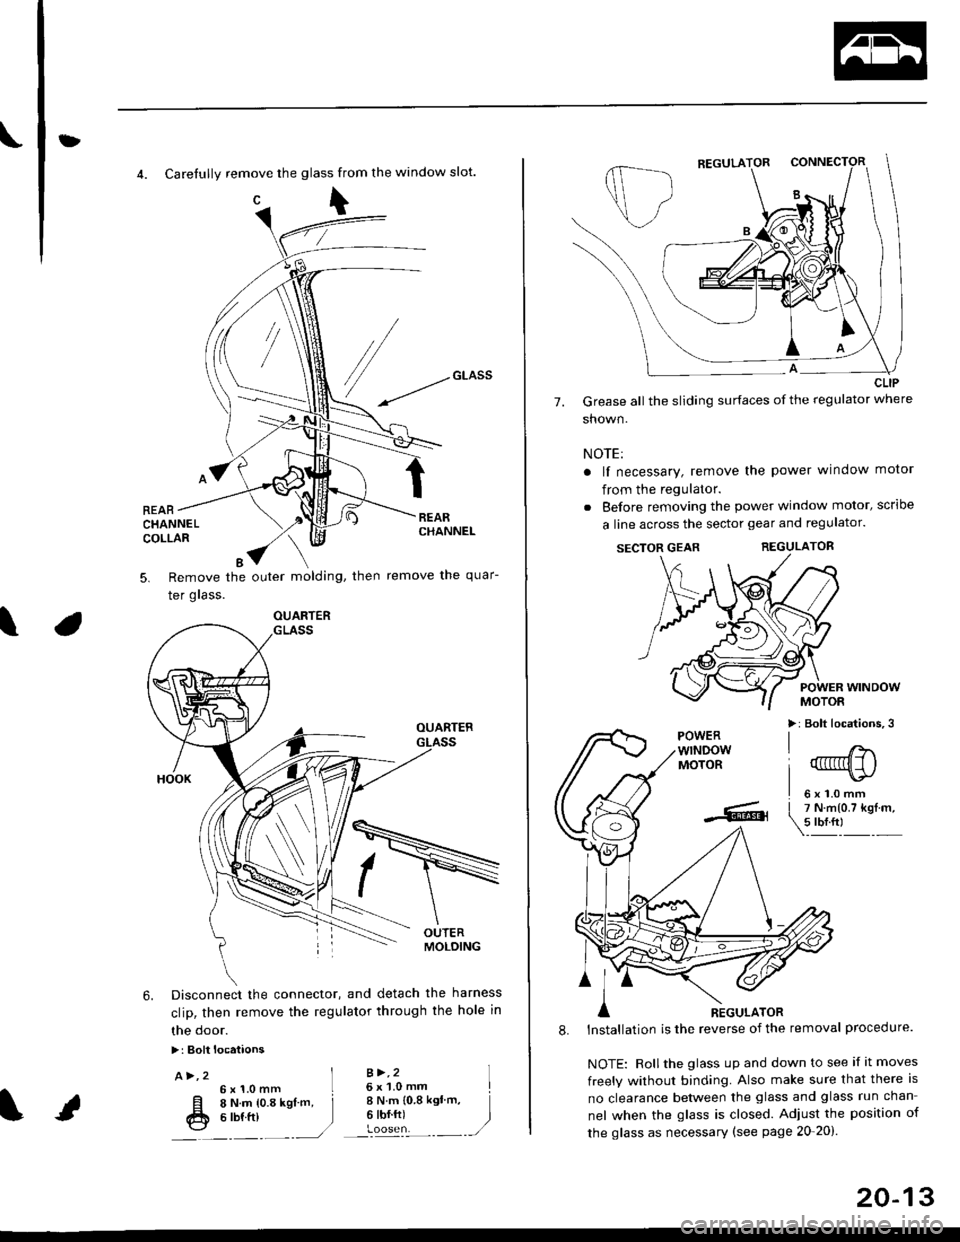 HONDA CIVIC 1999 6.G Workshop Manual t}
4. Carefully remove the glass from the window slot.
c\
REARCHANNELCOLLAR
Remove the outer molding, then
Ier grass.
remove the quar-5.
\
6. Disconnect the connector, and detach the harness
clip, the